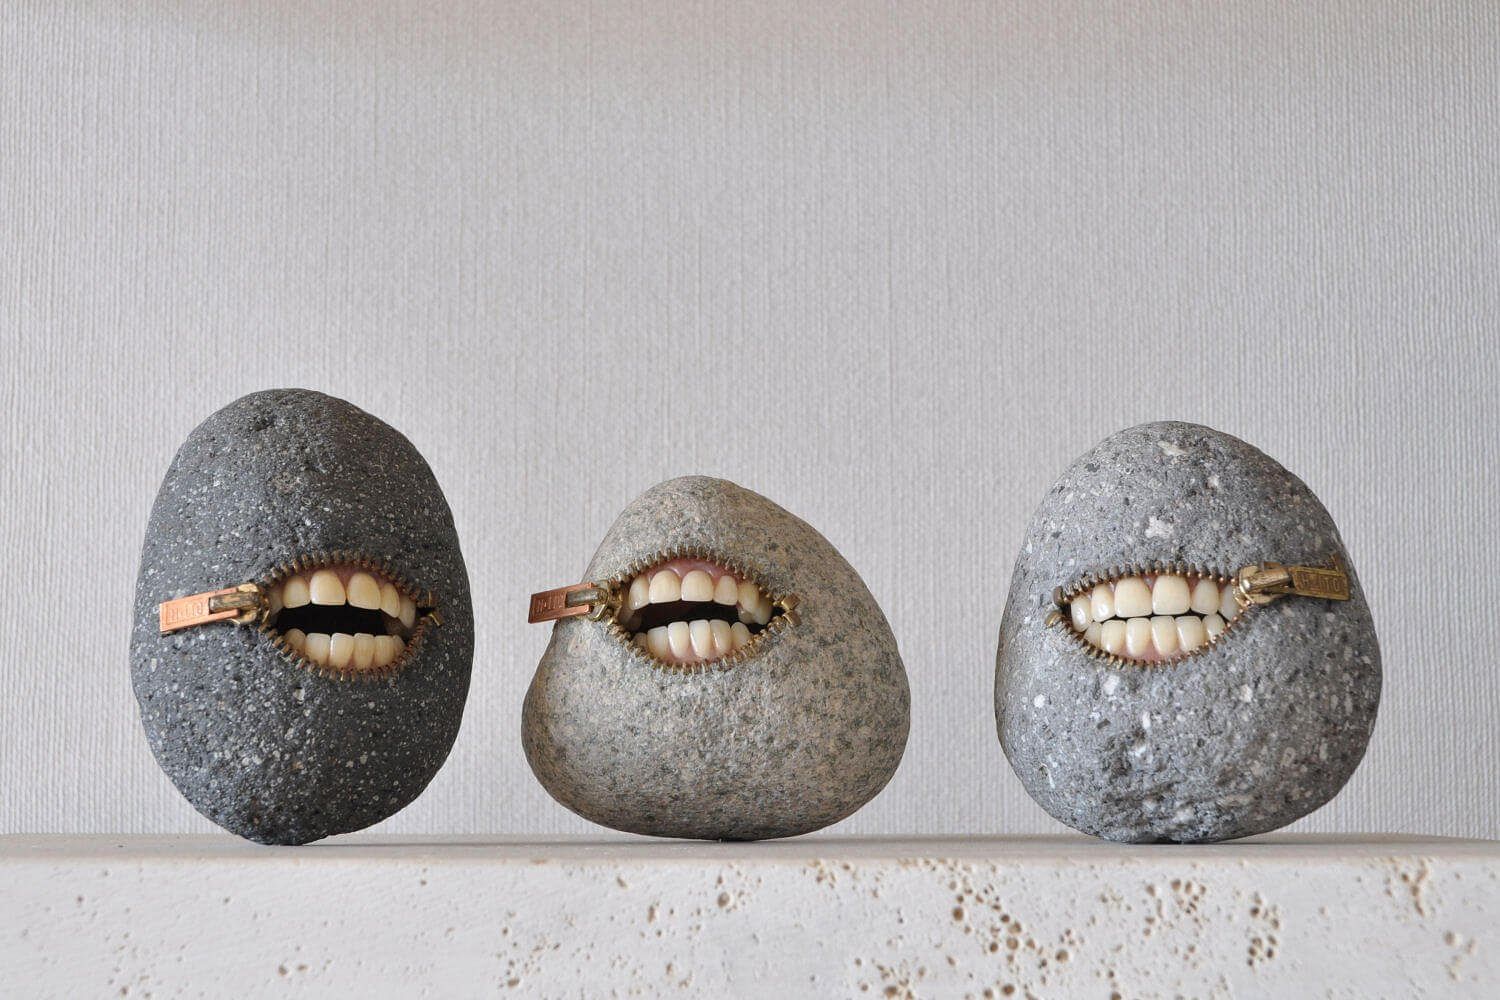 Japanese artist is making beautiful&amazing Sculptures from stones 